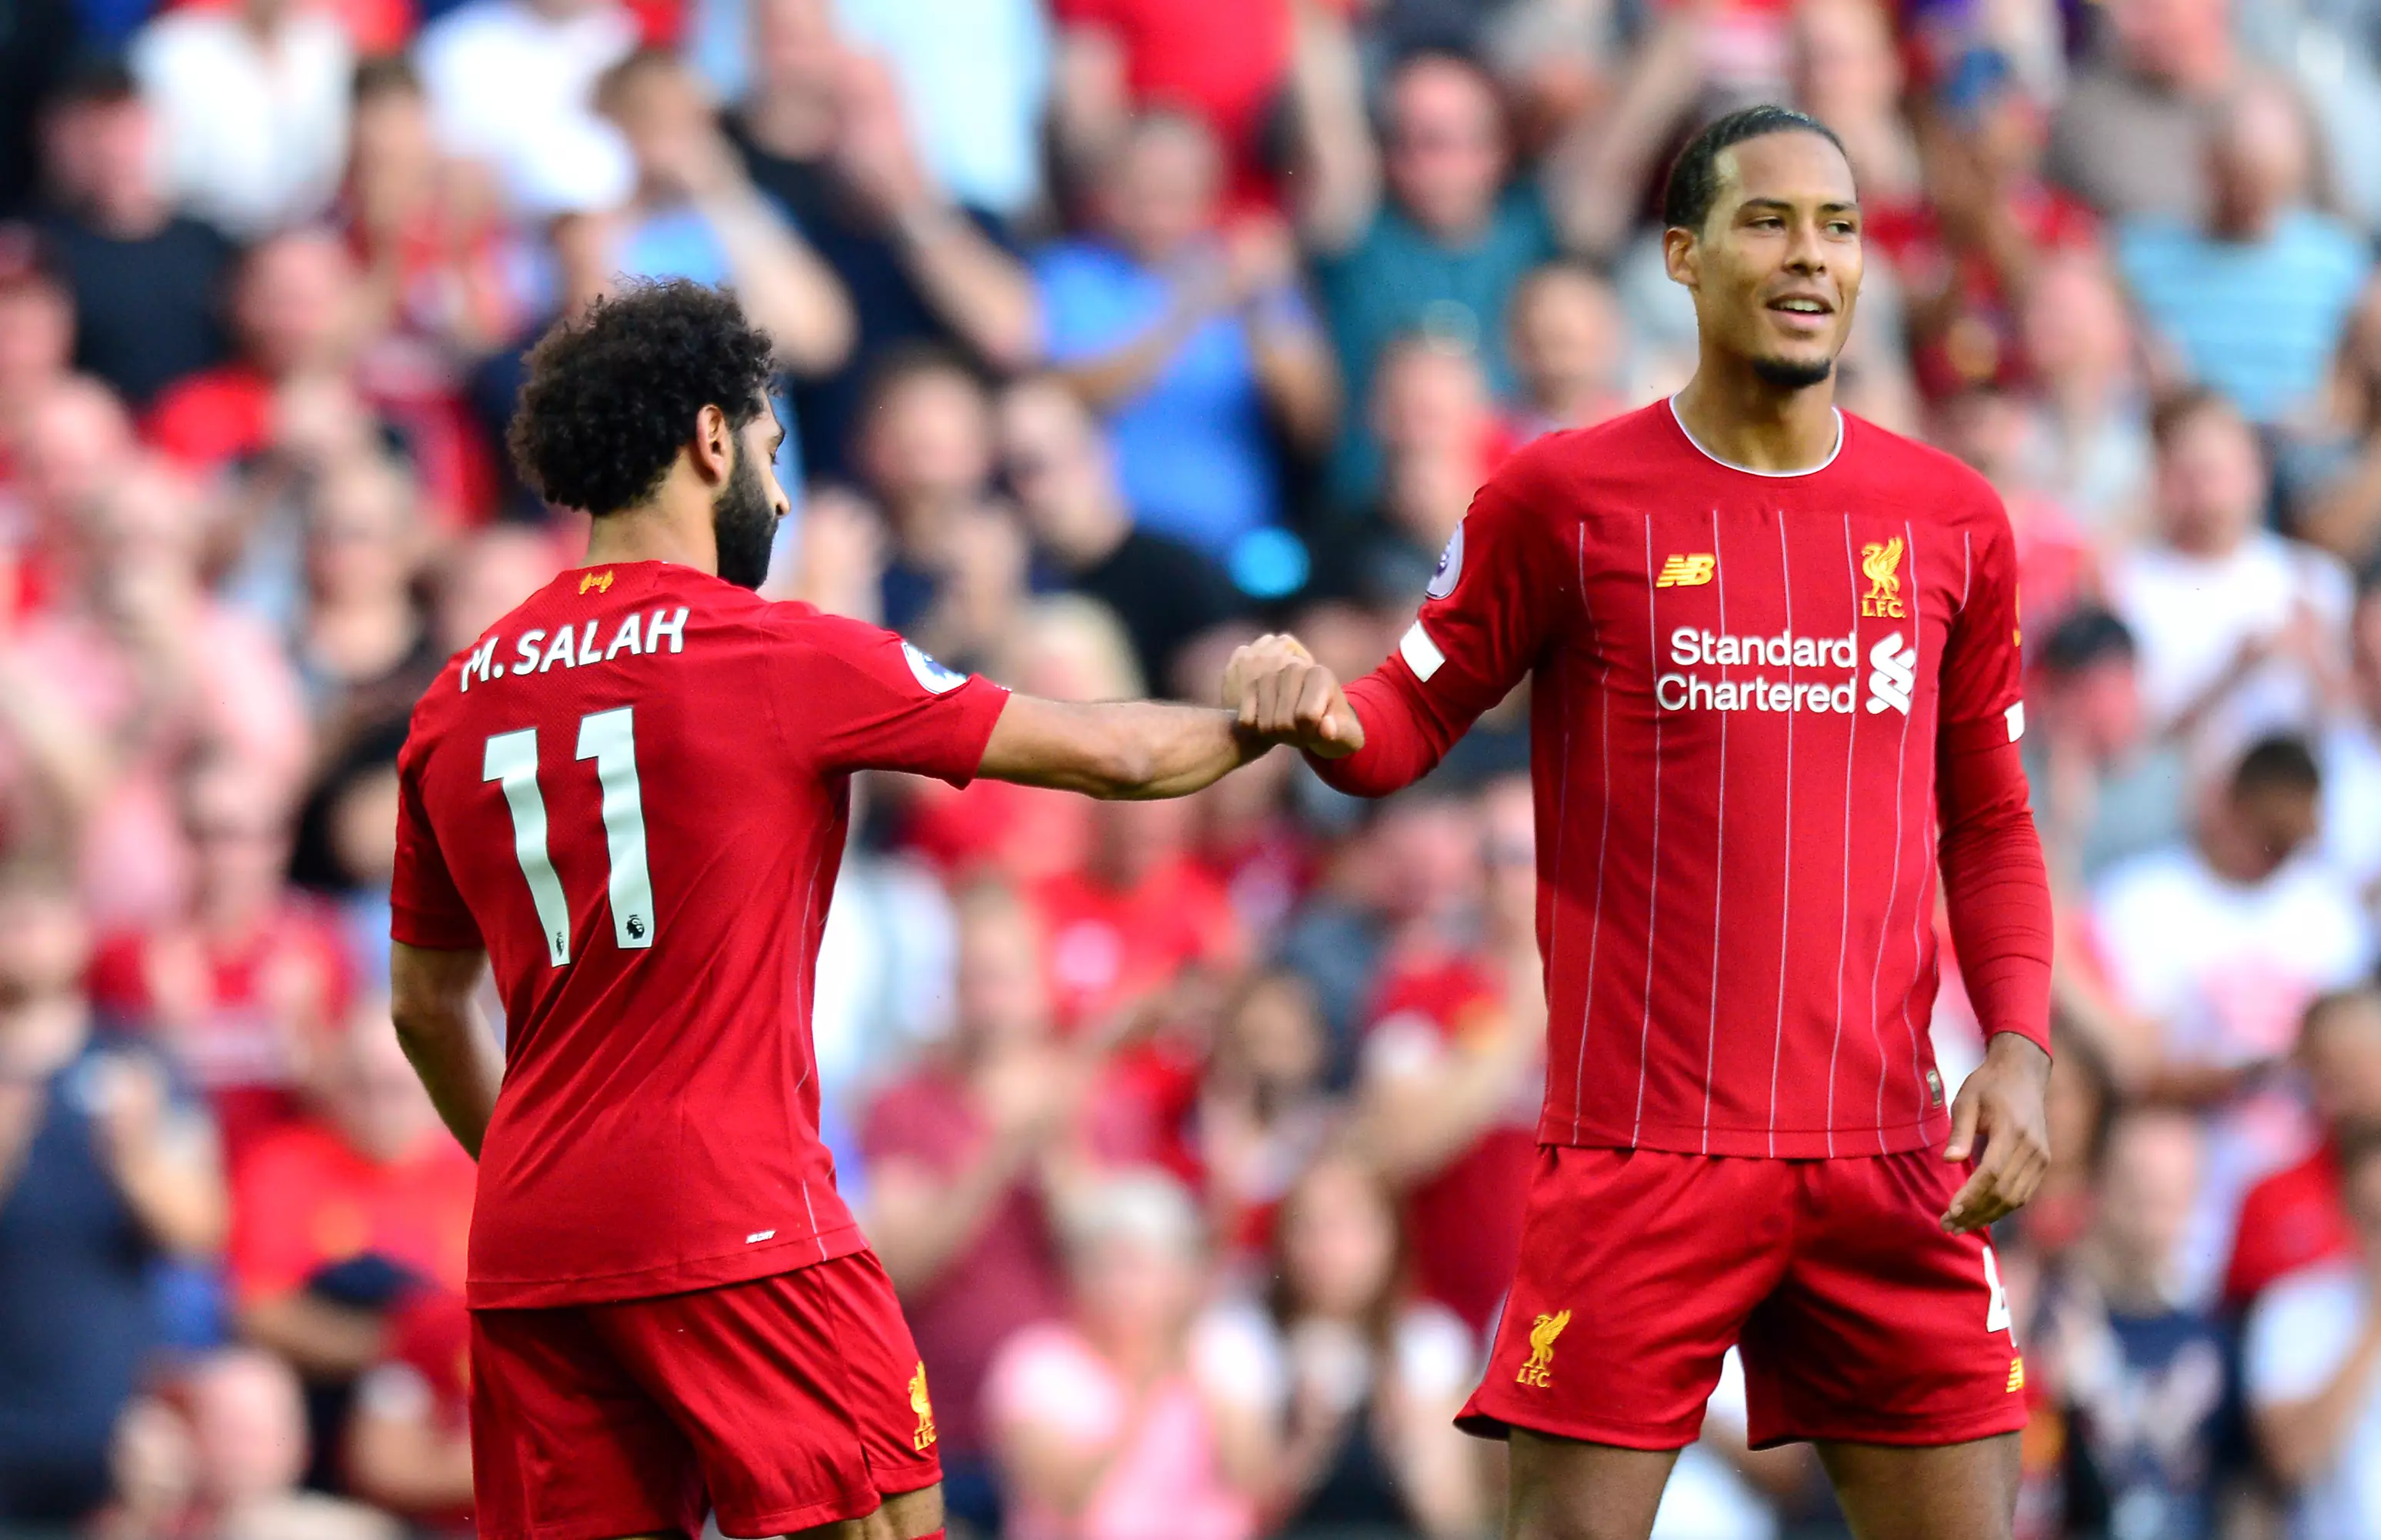 Virgil van Dijk joined Liverpool in January 2018 and turned them into contenders